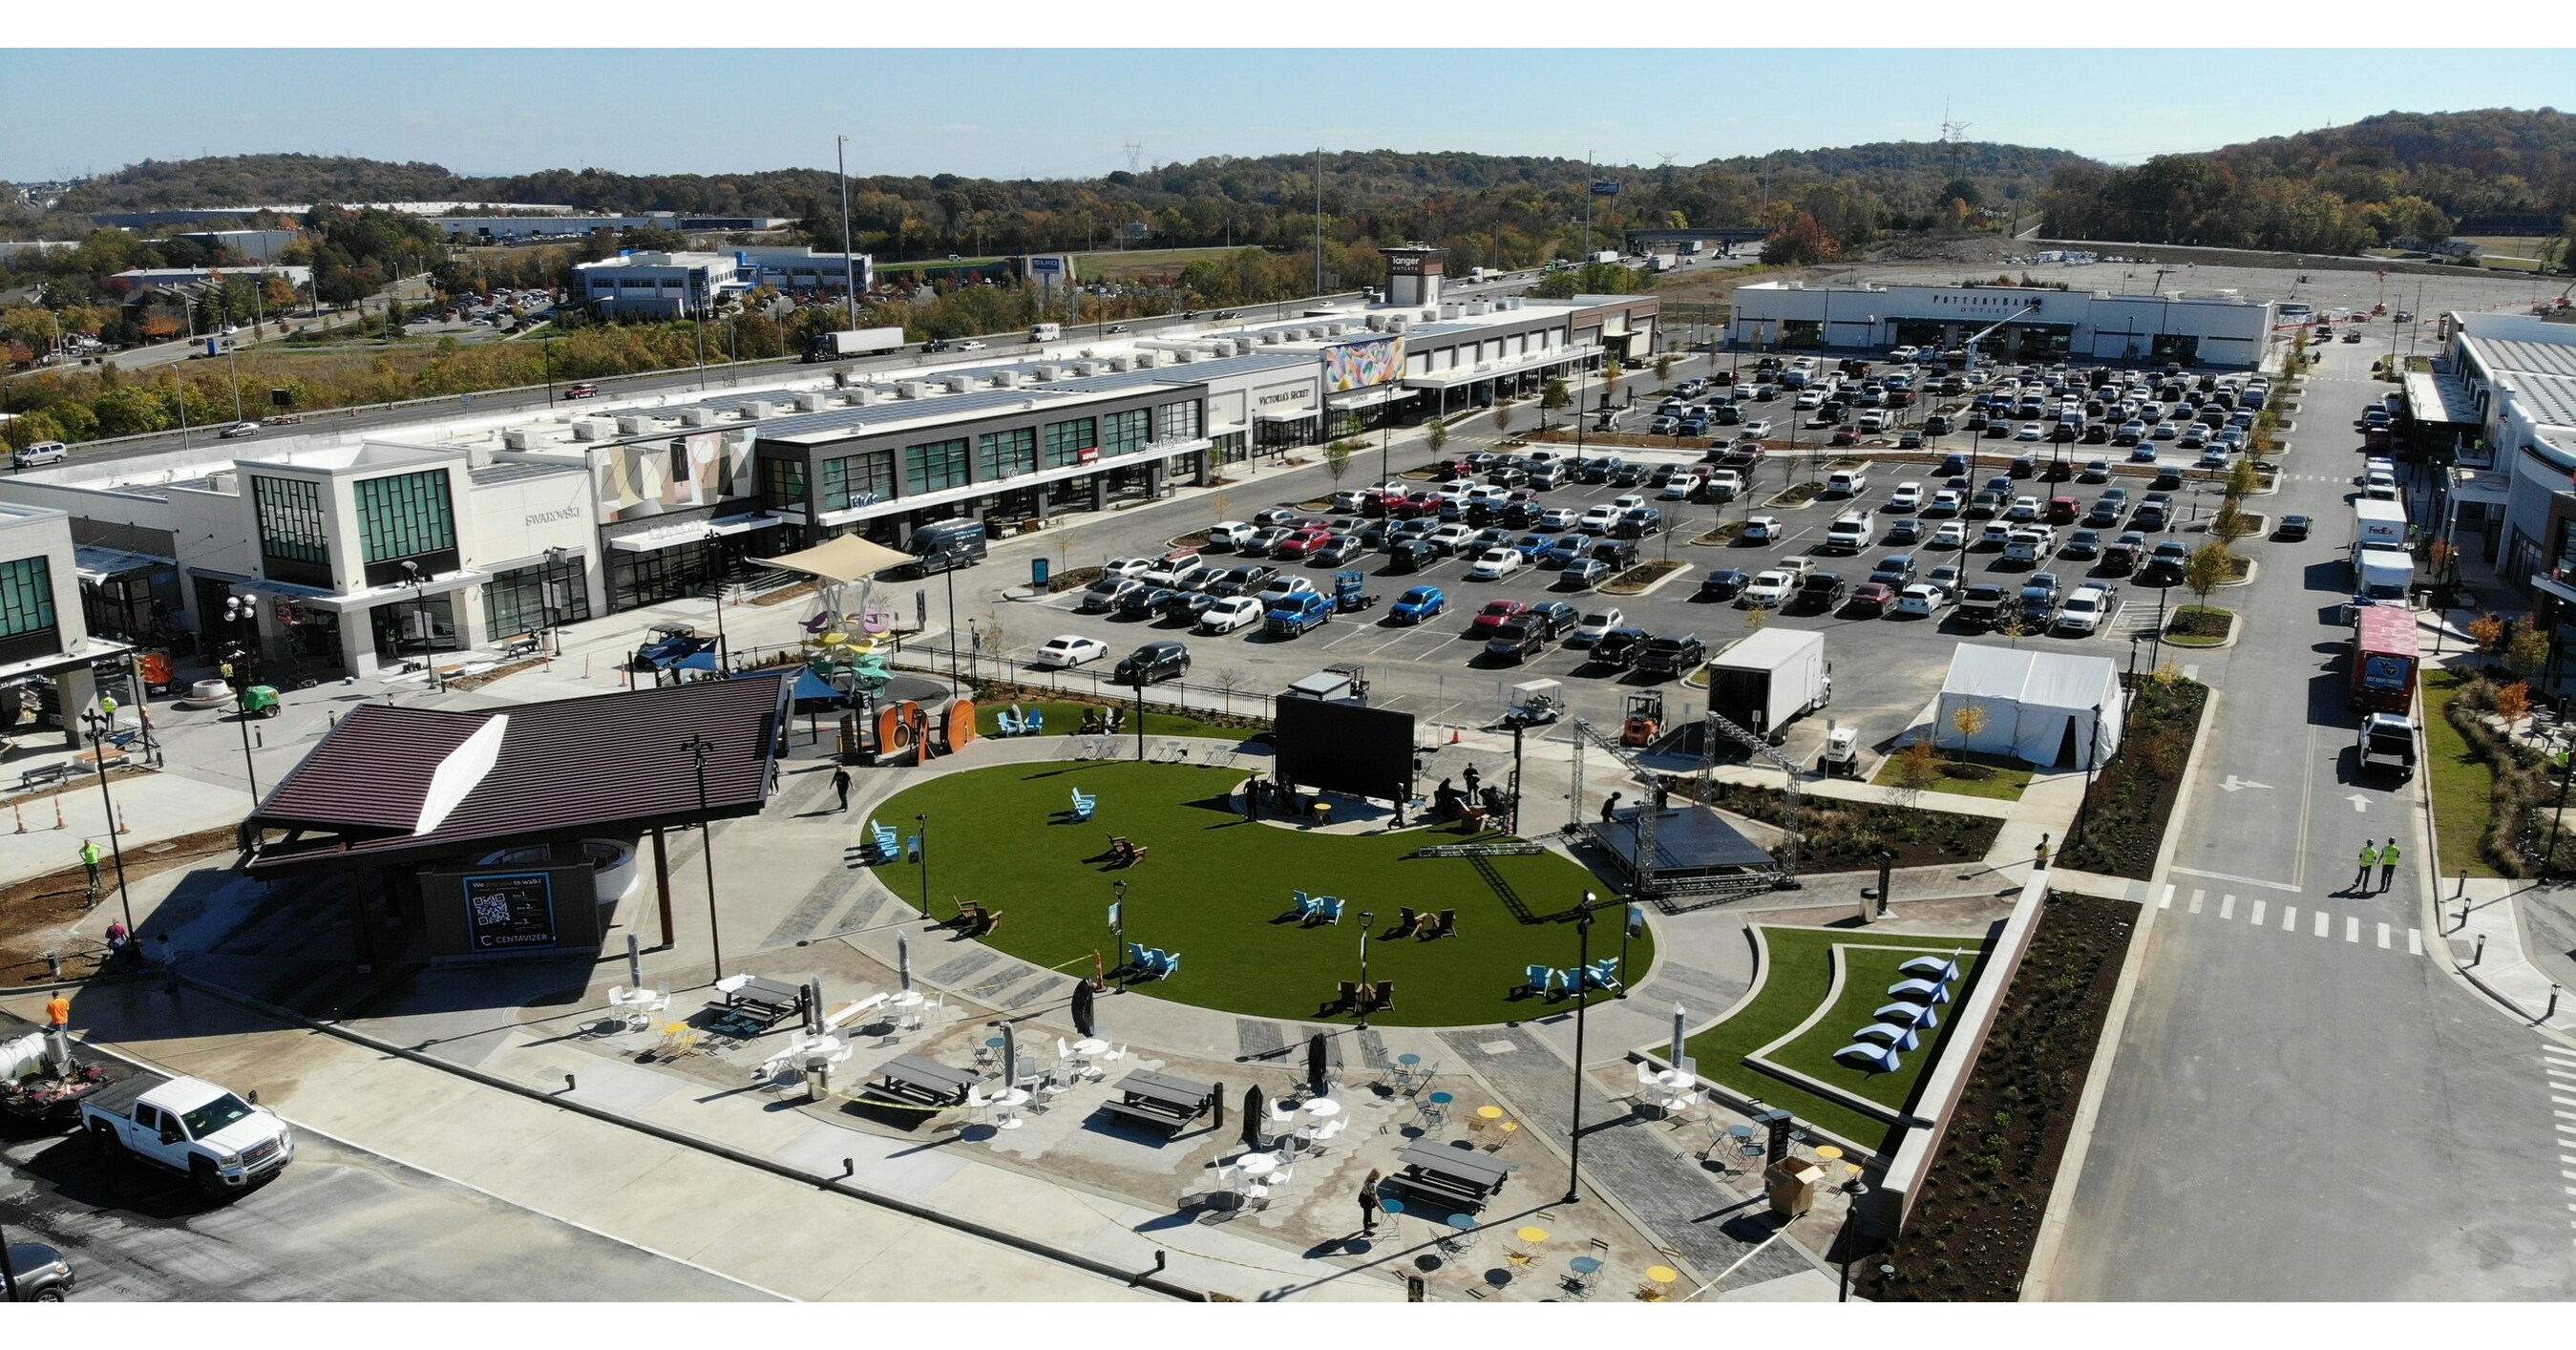 Explore Tanger Outlet Mall - Pigeon Forge's Premier Shopping Destination